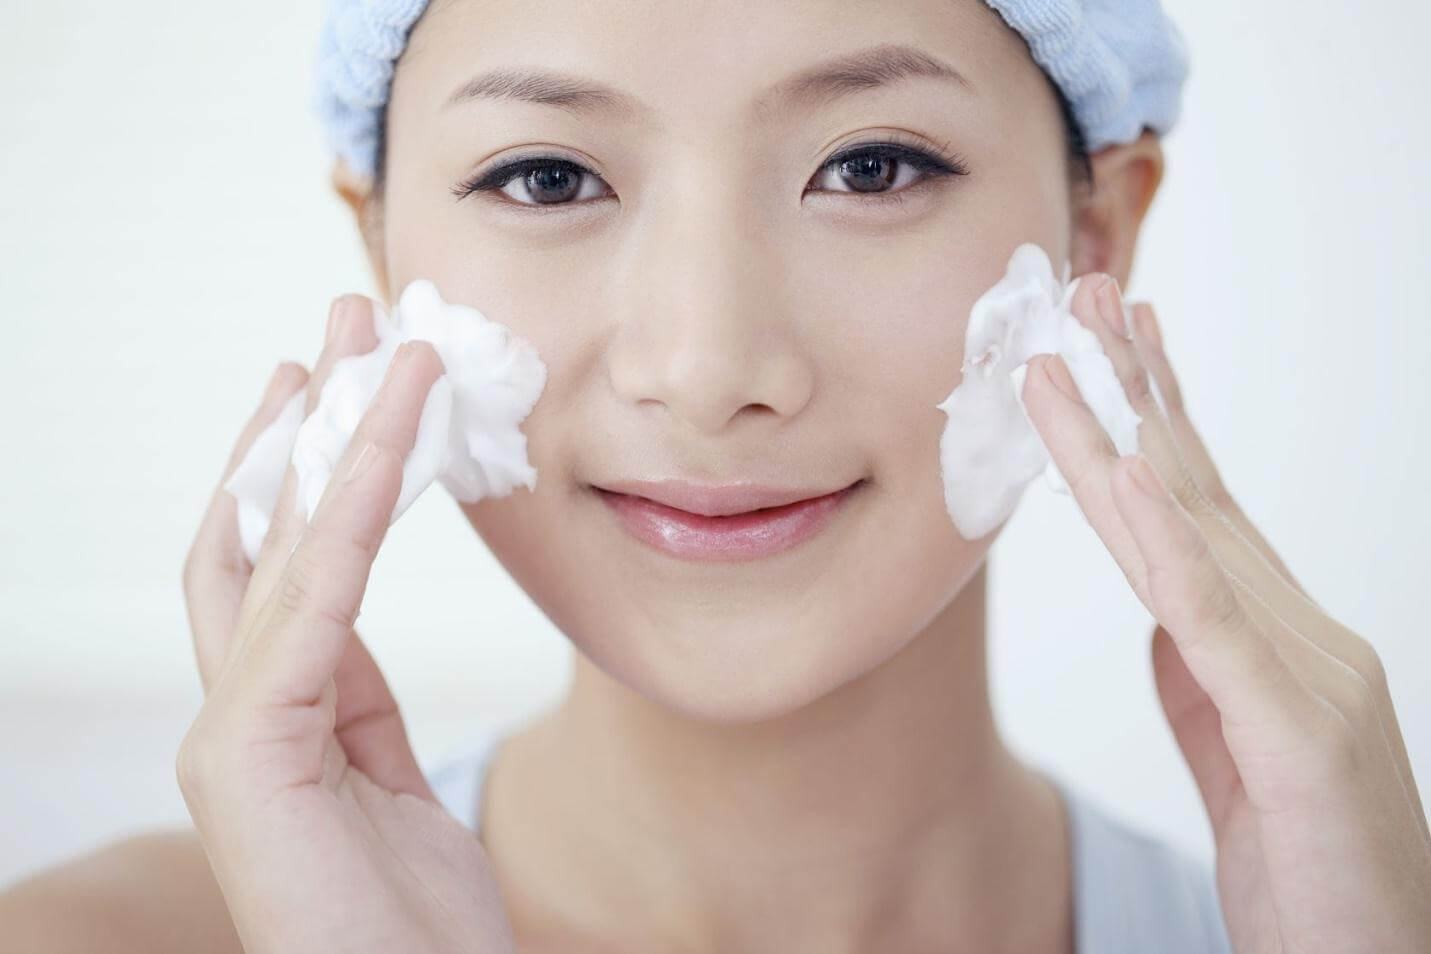 Dry & Sensitive Skin Care: Are You Making a Mistake? Comment